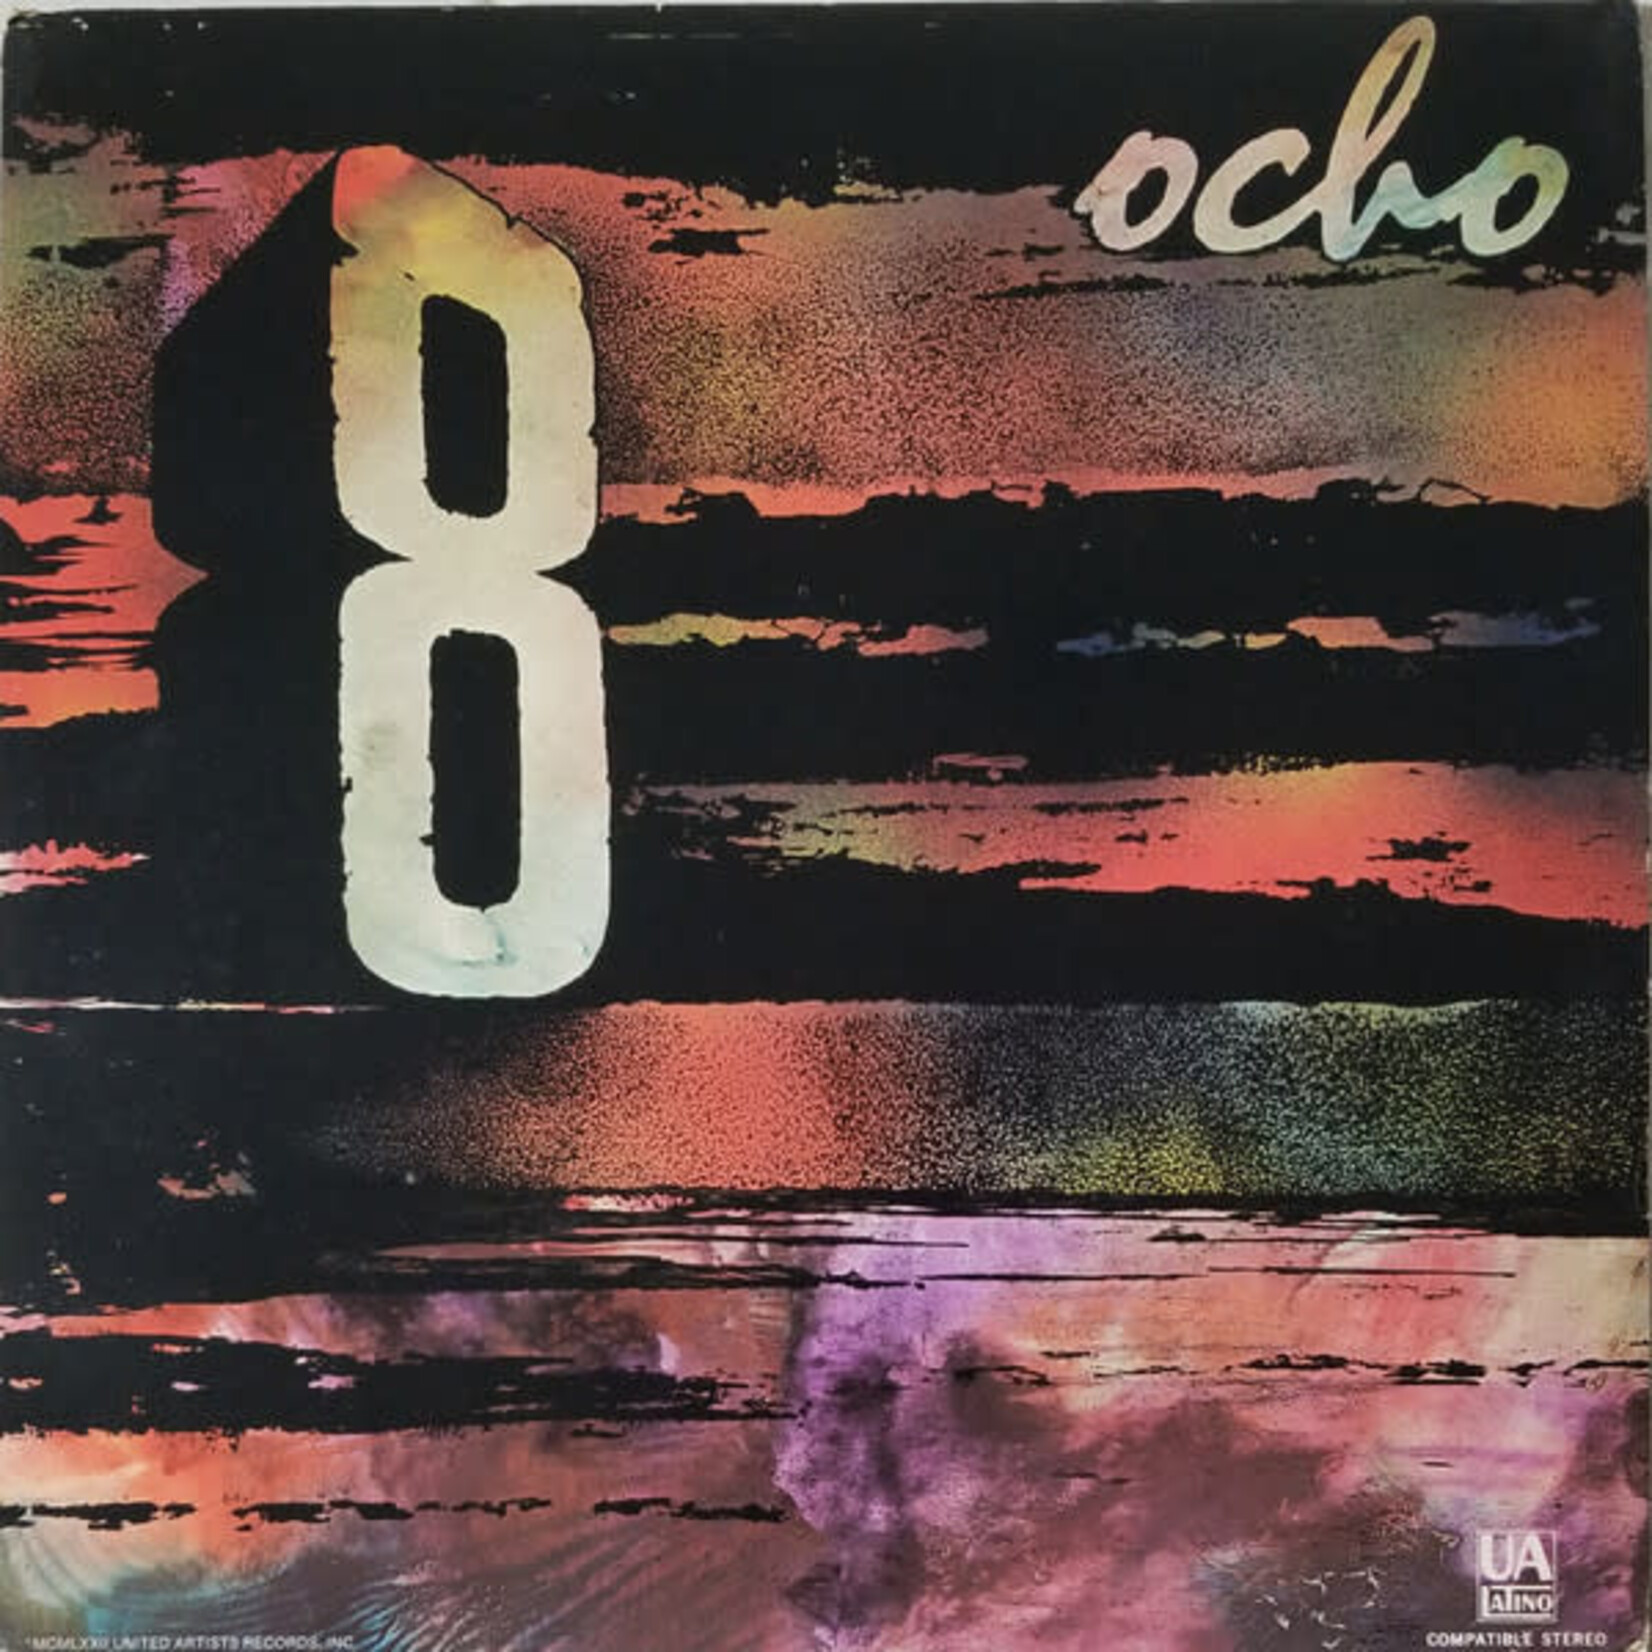 [Discontinued] Ocho: Self-Titled (Cover VG/Disc VG) [KOLLECTIBLES]